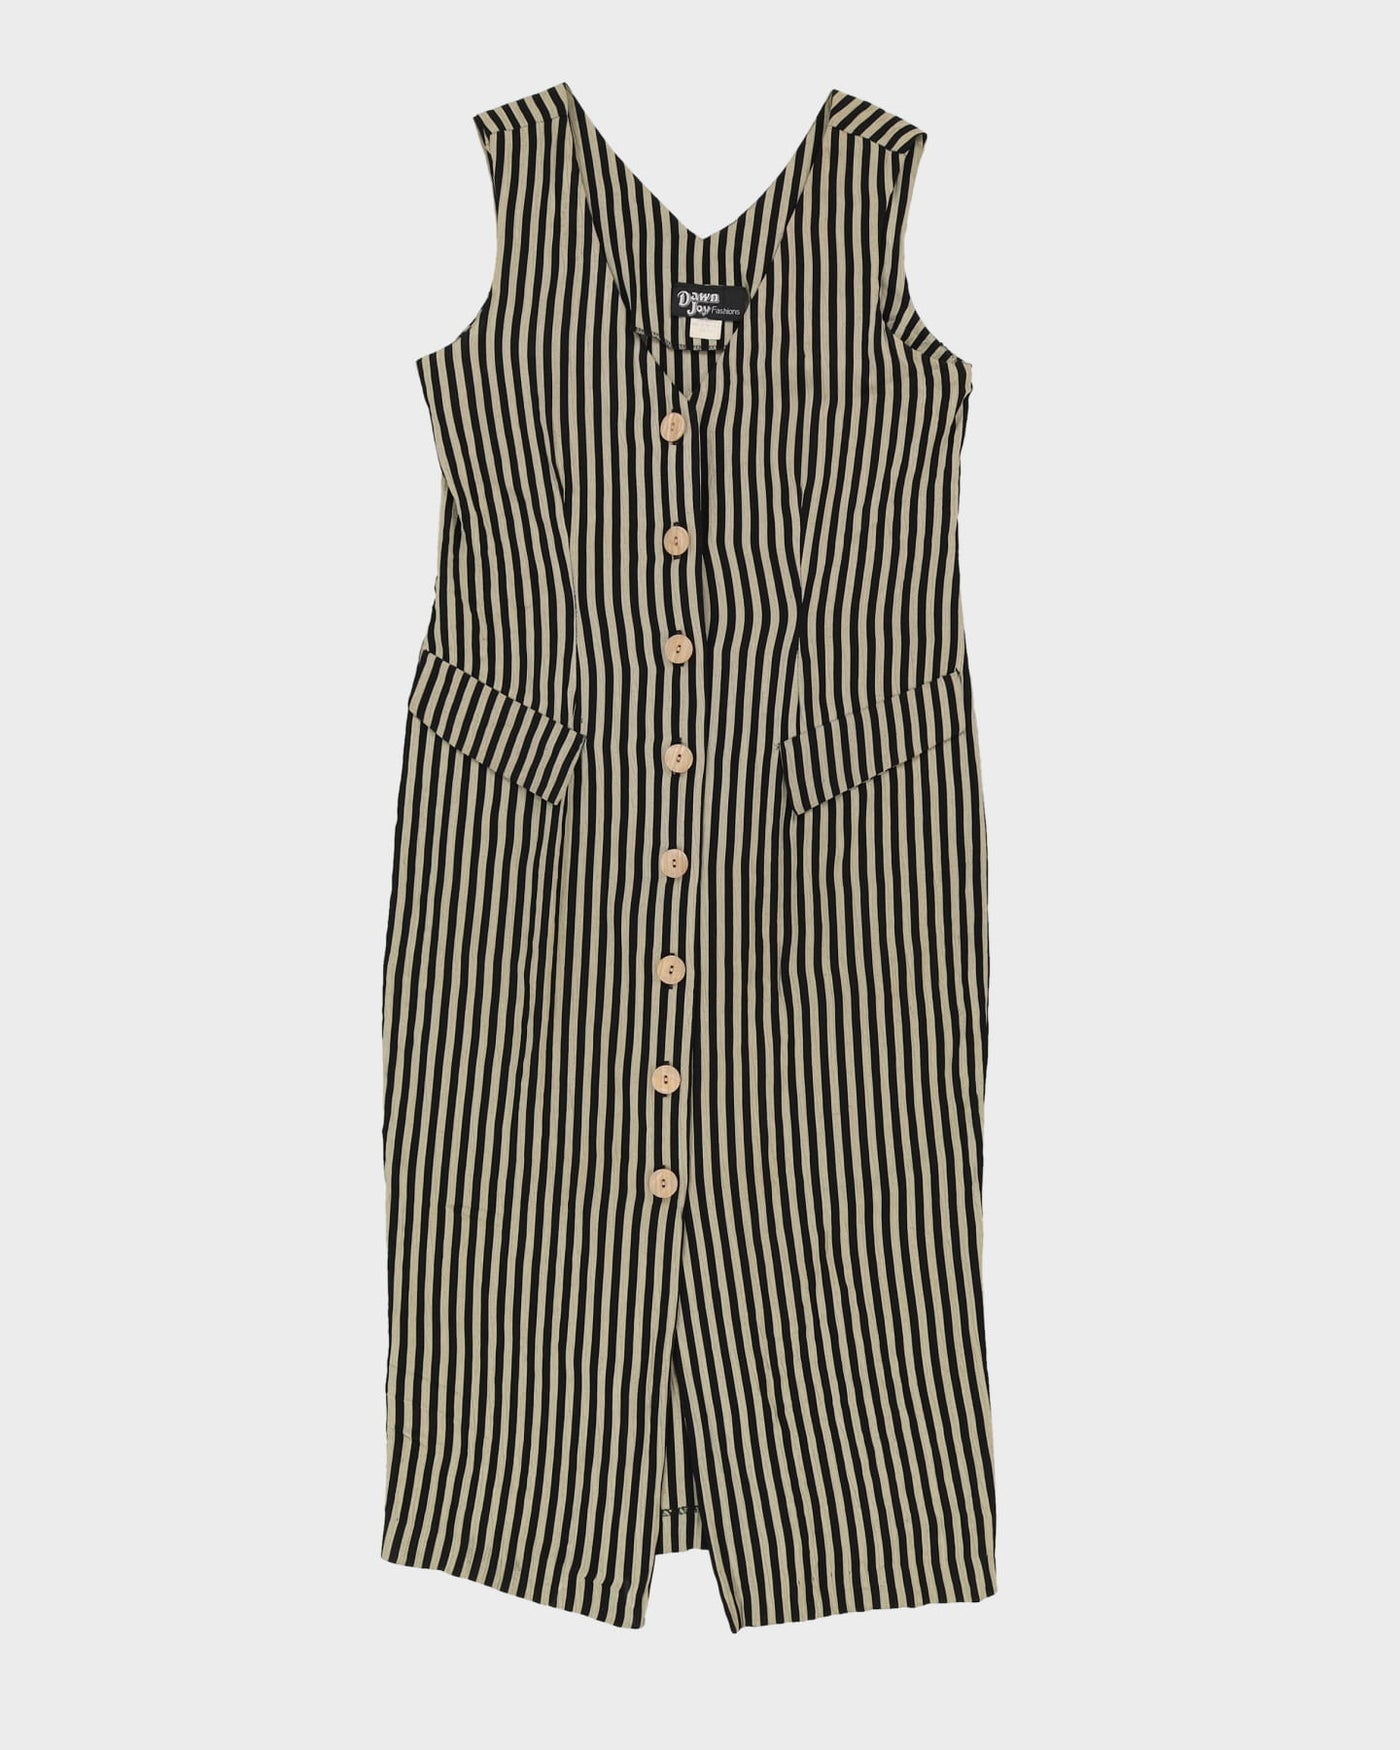 00s Black And Brown Striped Dress - S